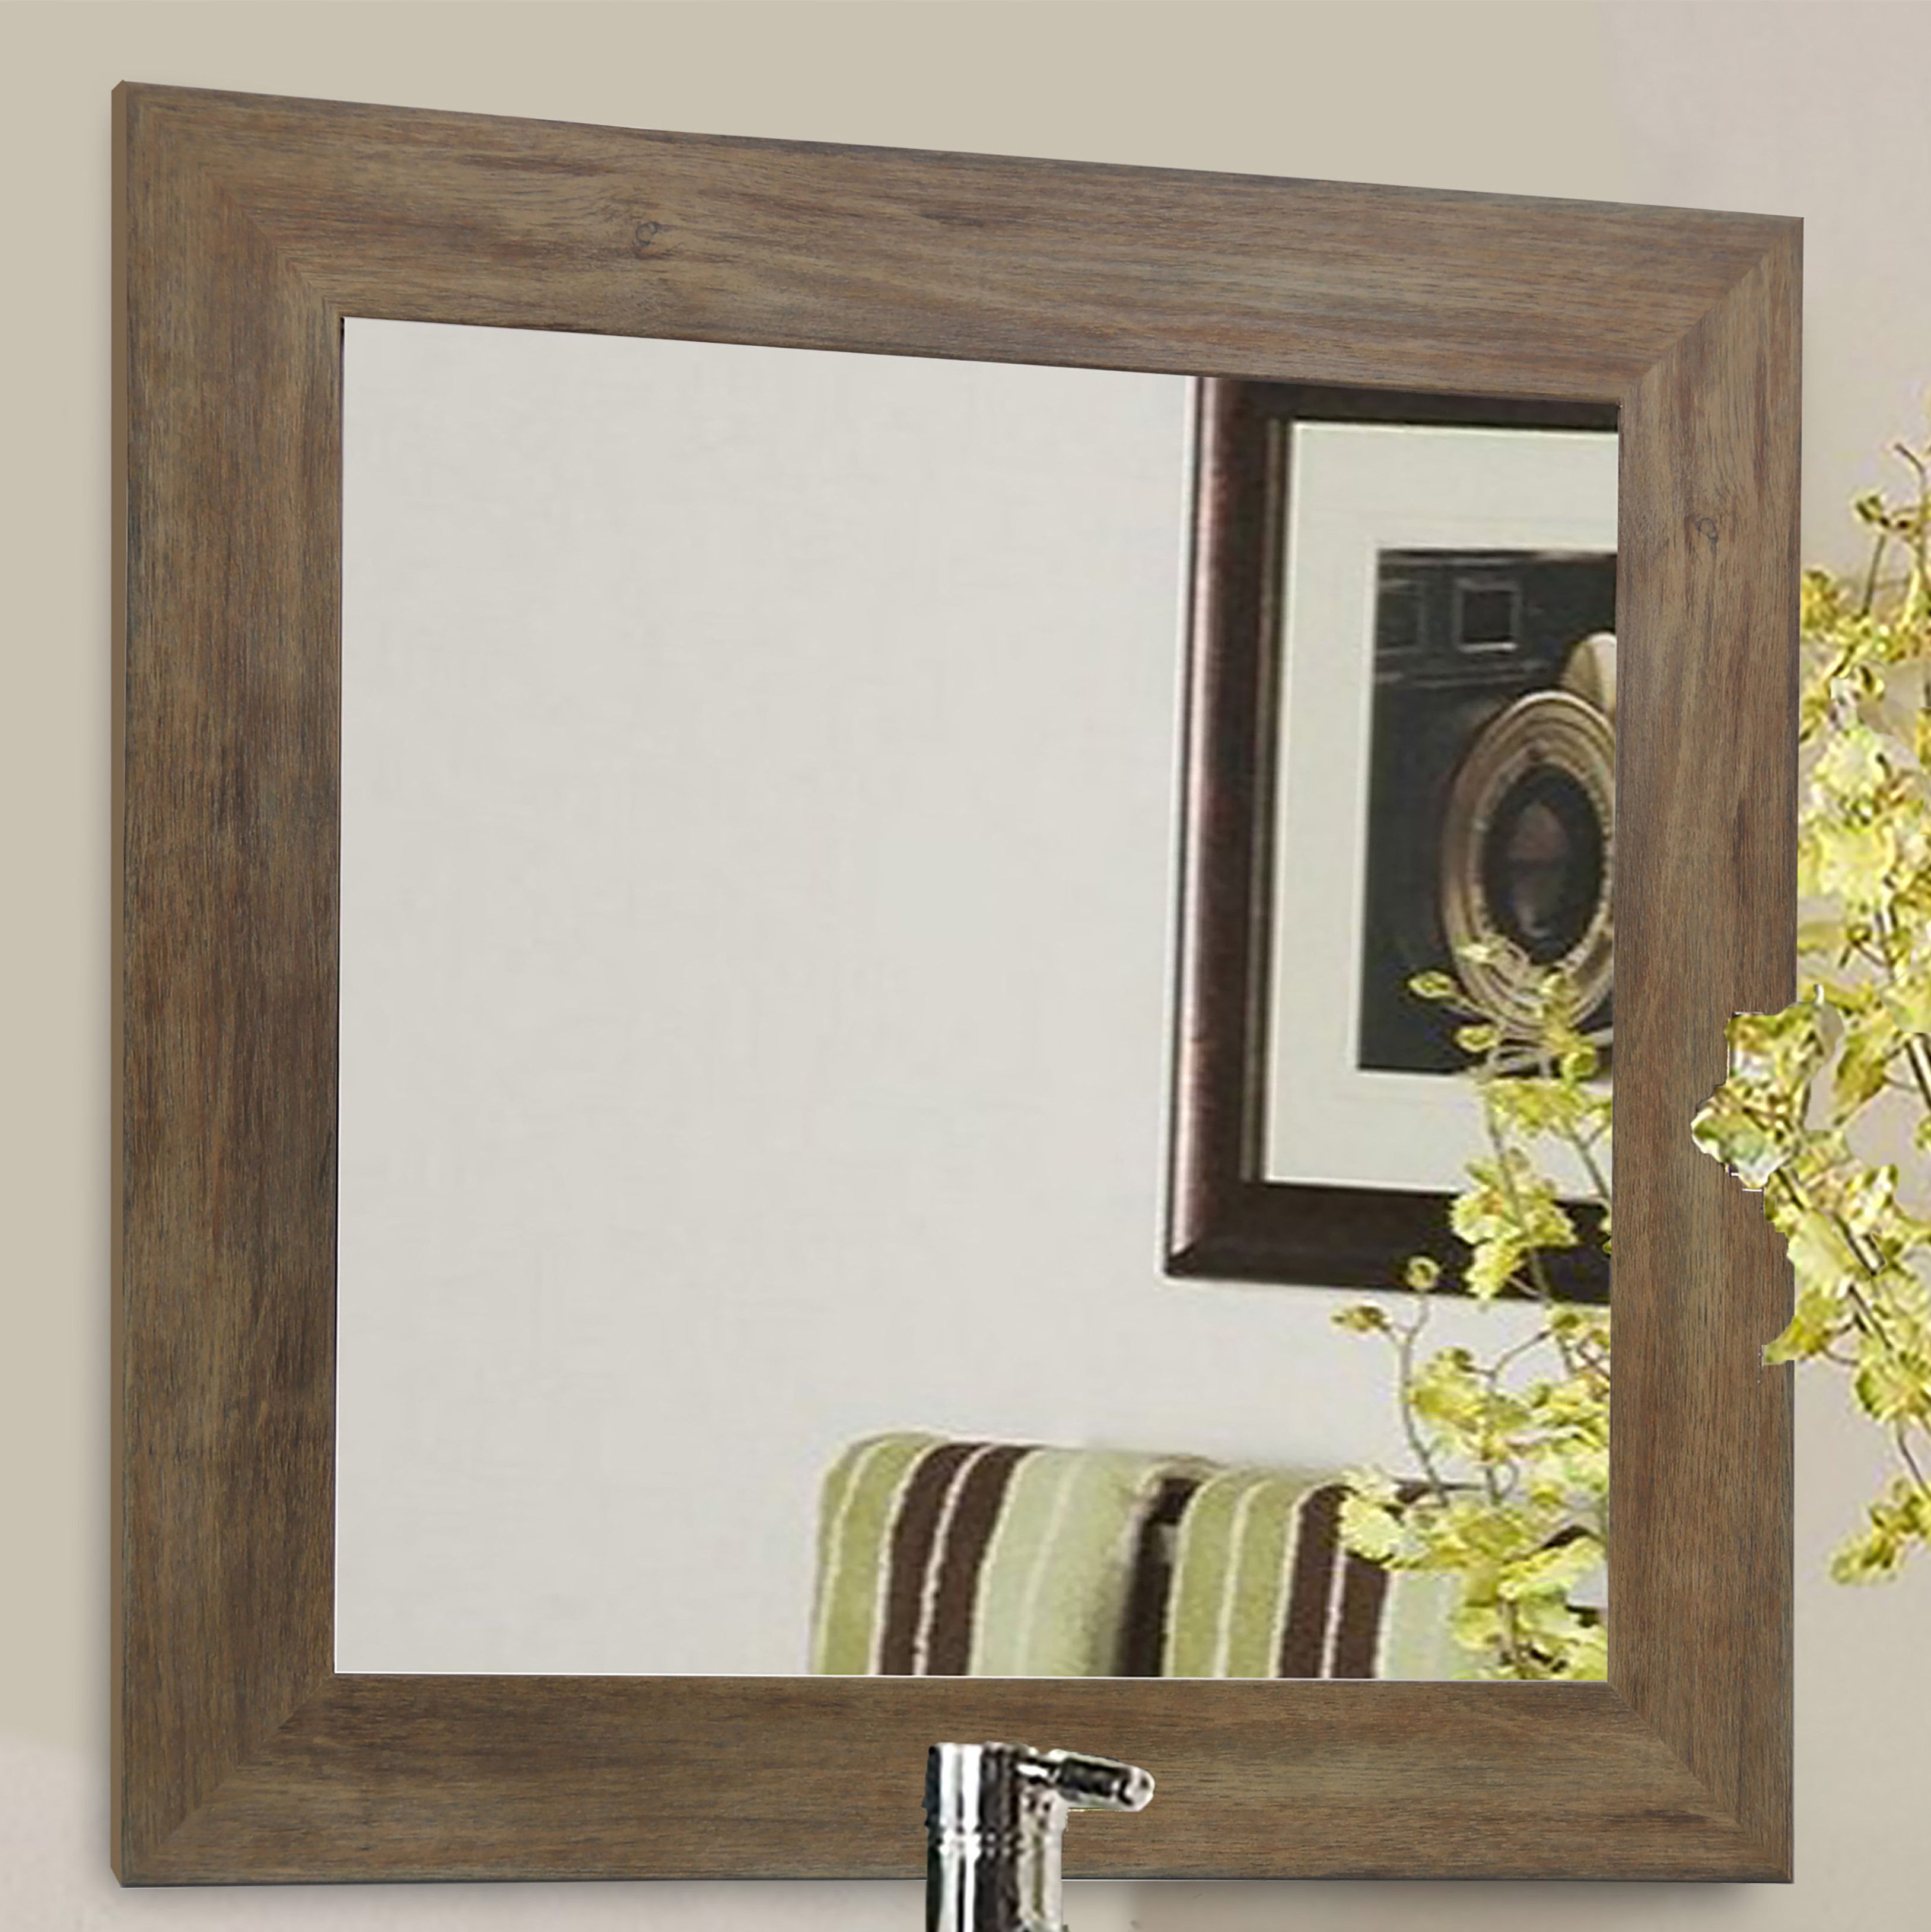 Rayne Mirrors Barnwood Wall Accent Mirror Within Most Recent Janie Rectangular Wall Mirrors (View 13 of 20)